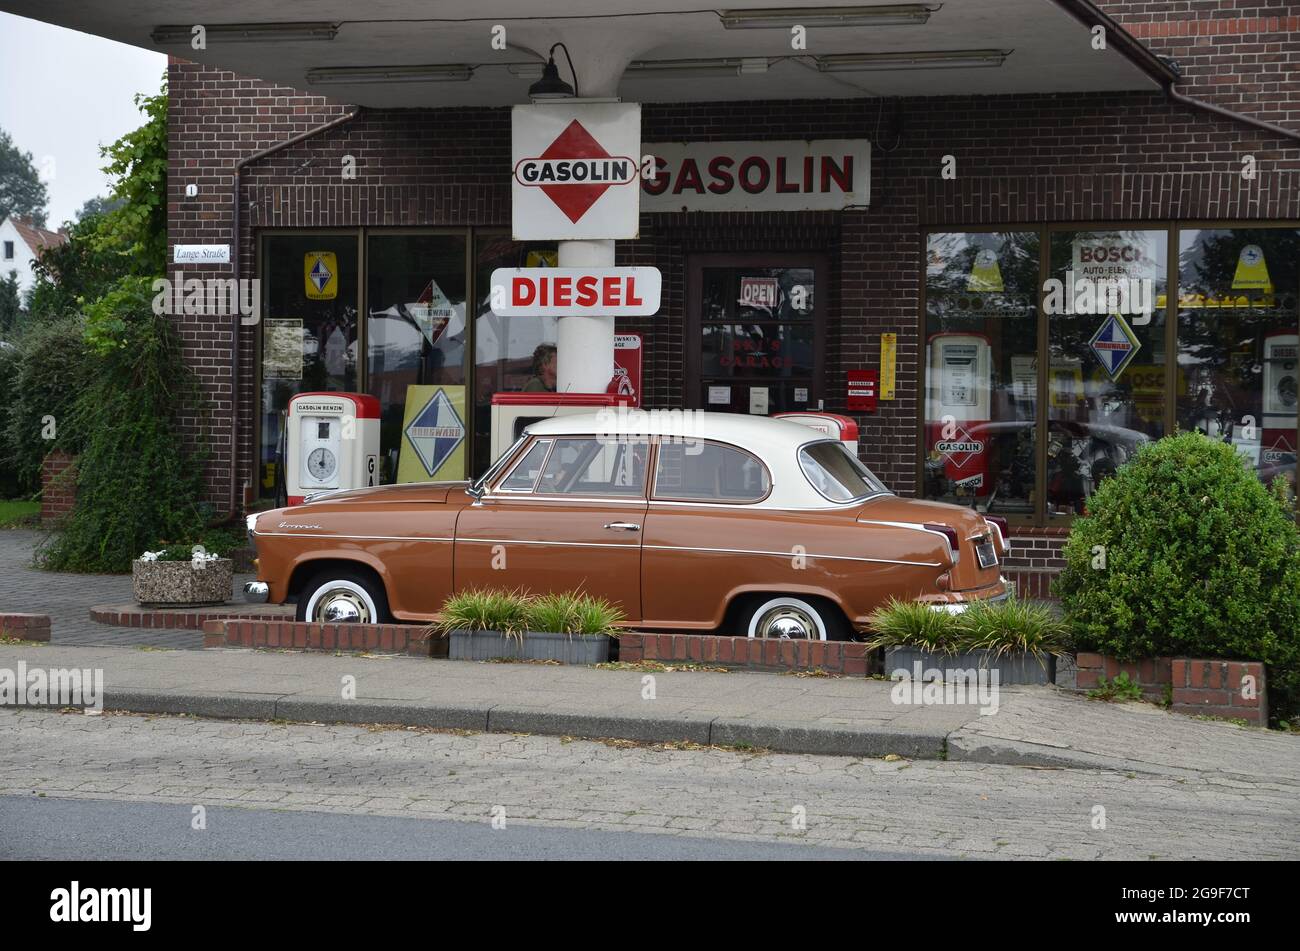 transport, car, Borgward Isabella, Bruchhausen-Vilsen, Germany, 2011  patrol station, classic car, ADDITIONAL-RIGHTS-CLEARANCE-INFO-NOT-AVAILABLE Stock Photo